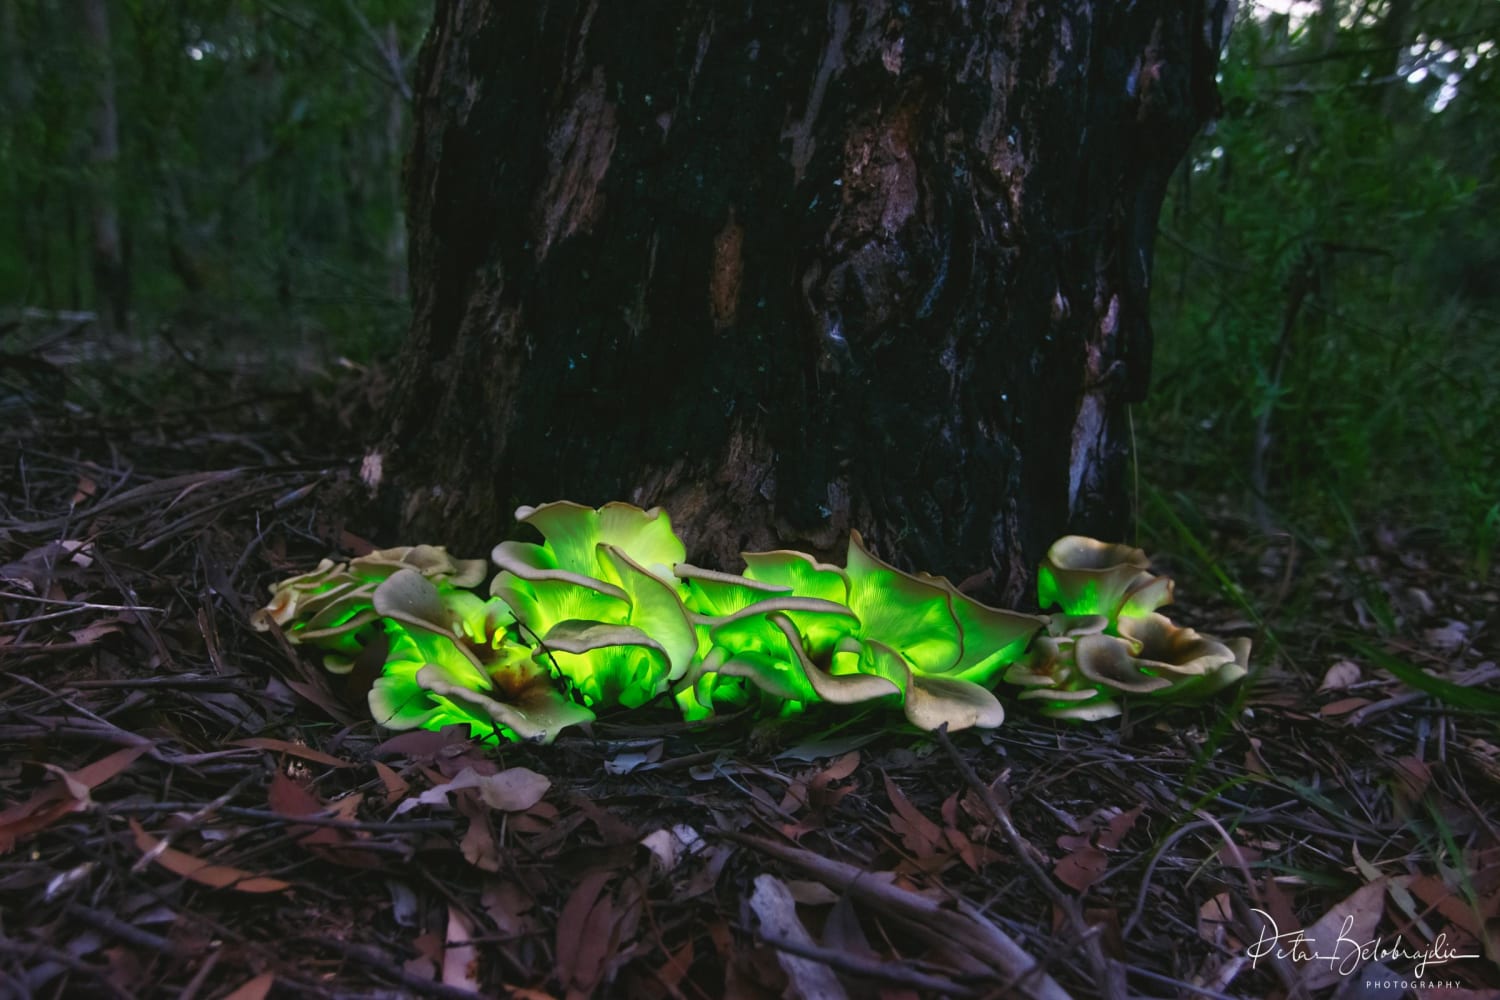 These bioluminescent ghost mushrooms that glow at night